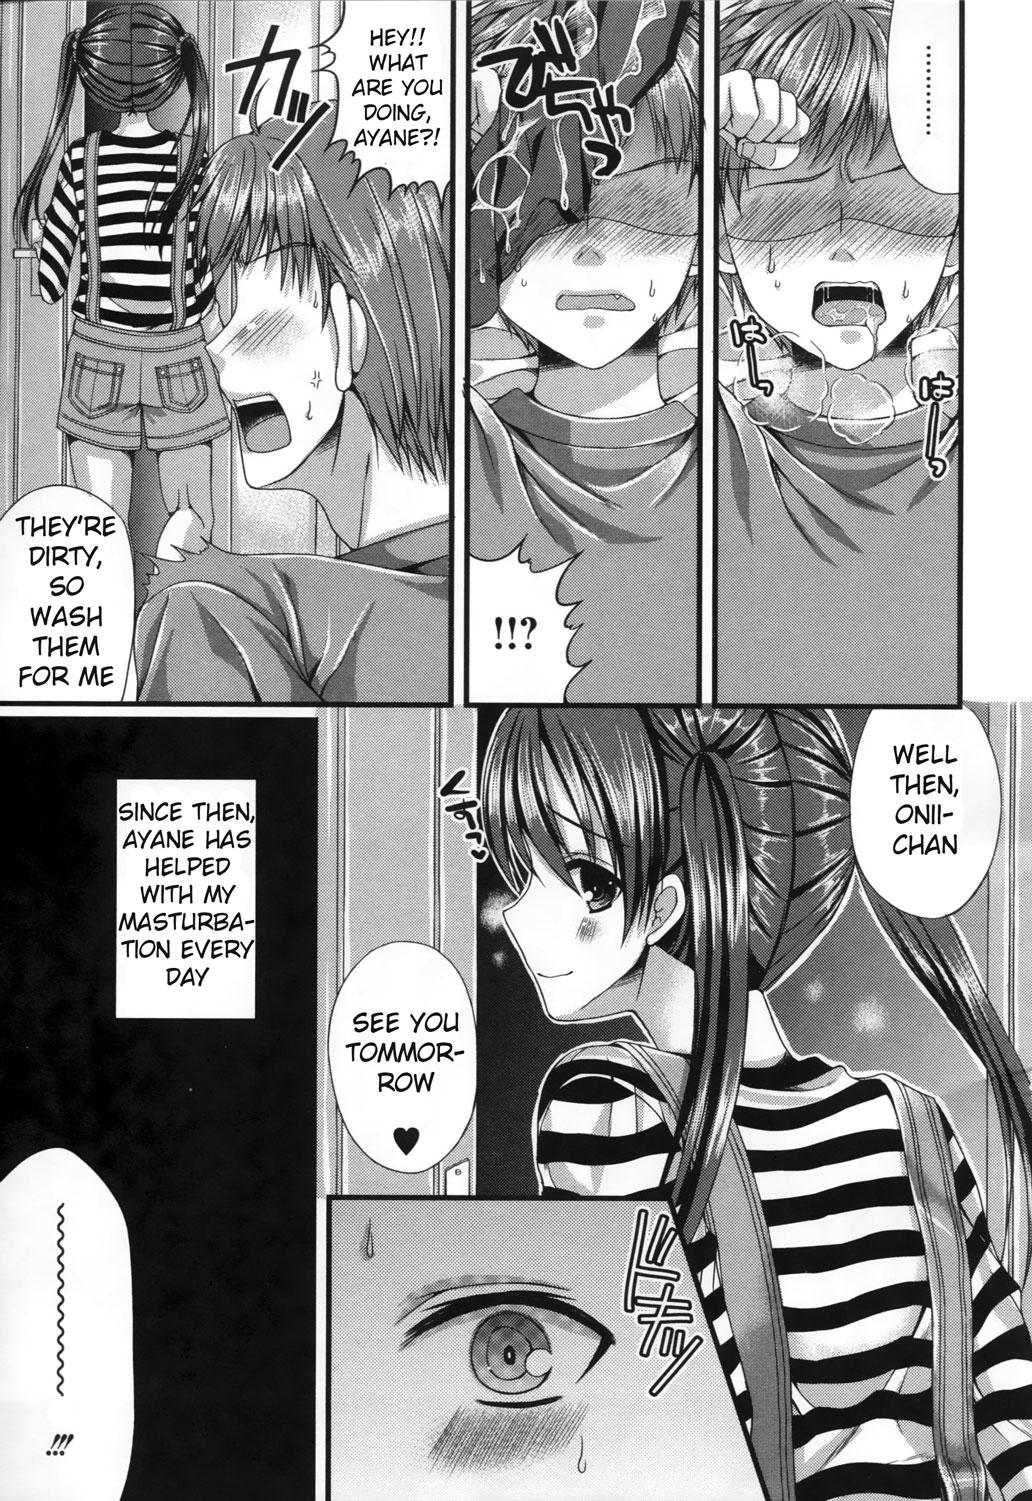 Lesbos Onii-chan training diary Blow Job Porn - Page 7